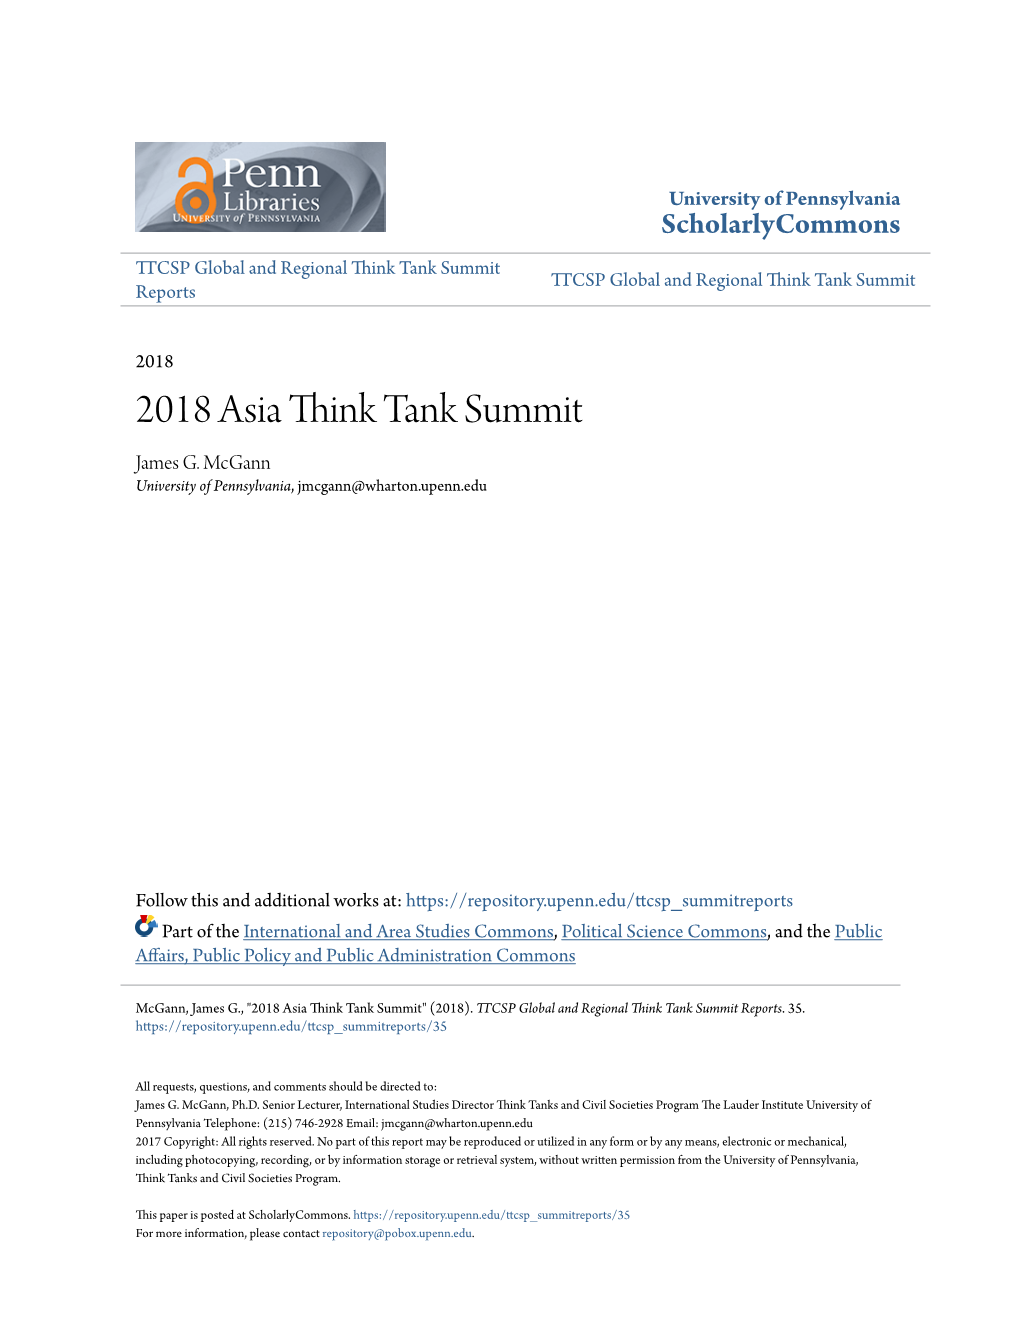 2018 Asia Think Tank Summit Is Taking Place at a Change